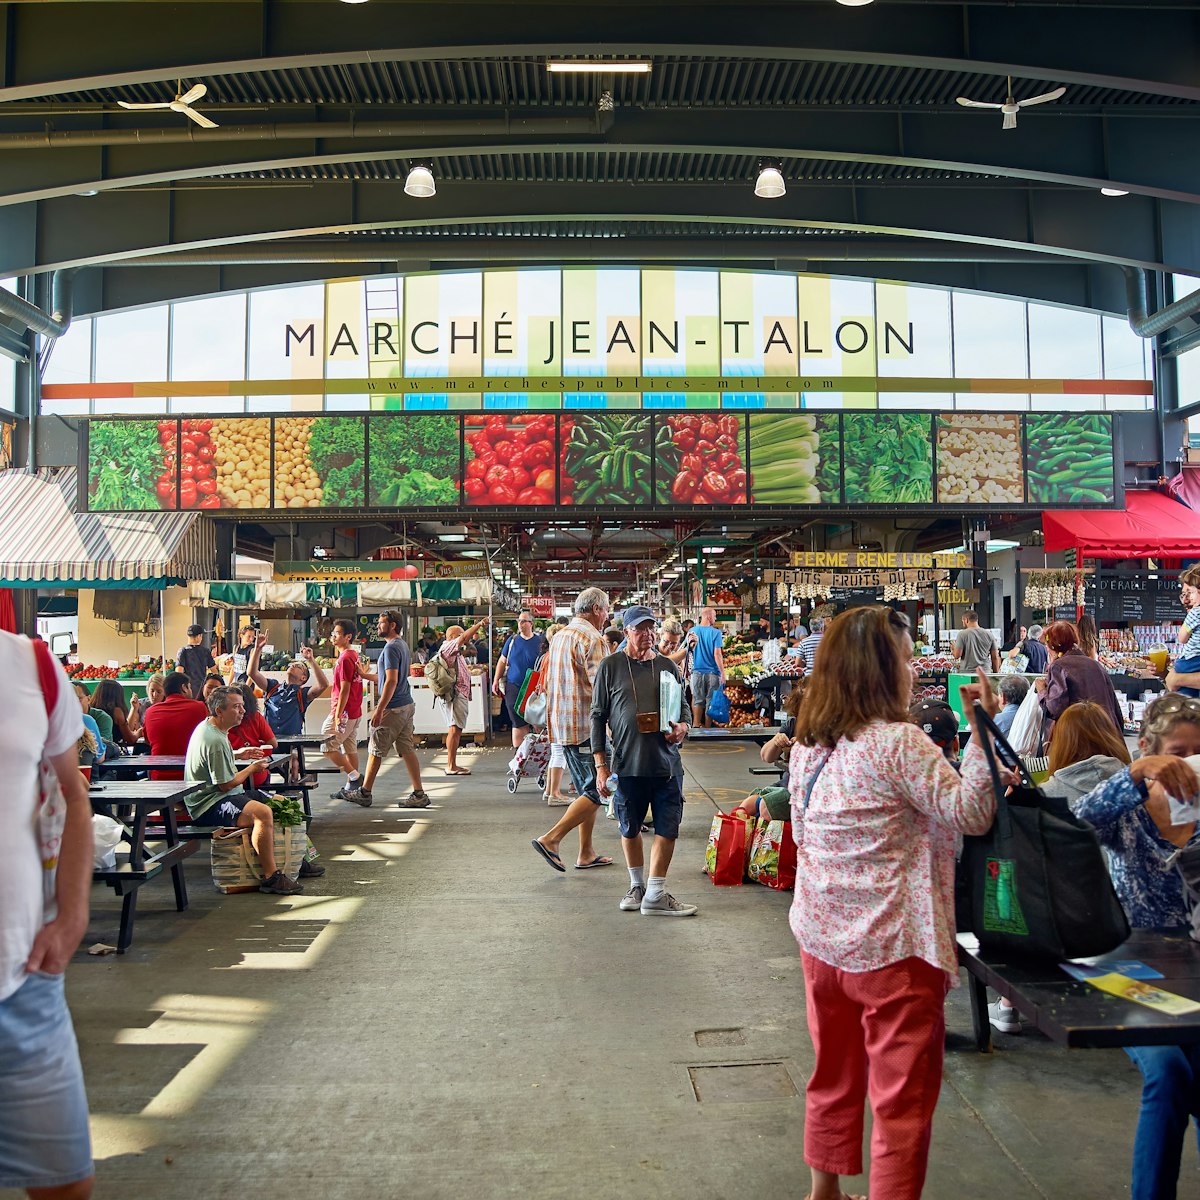 September 29, 2018: Inside the Jean-Talon Market in Montreal.
1363383005
architecture, building, busy, buy, canada, city, cityscape, color, colorful, covered, crowd, display, downtown, entrance, farmer, farmers market, fresh, fruit, grocery, highrise, inside, interior, italy, jean, jean-talon, largest, little, local, marche, market, marketplace, modern, montreal, old, people, place, public, quebec, scene, scenery, scenic, shopping, street, summer, talon, trade, urban, vegetable, view, walking